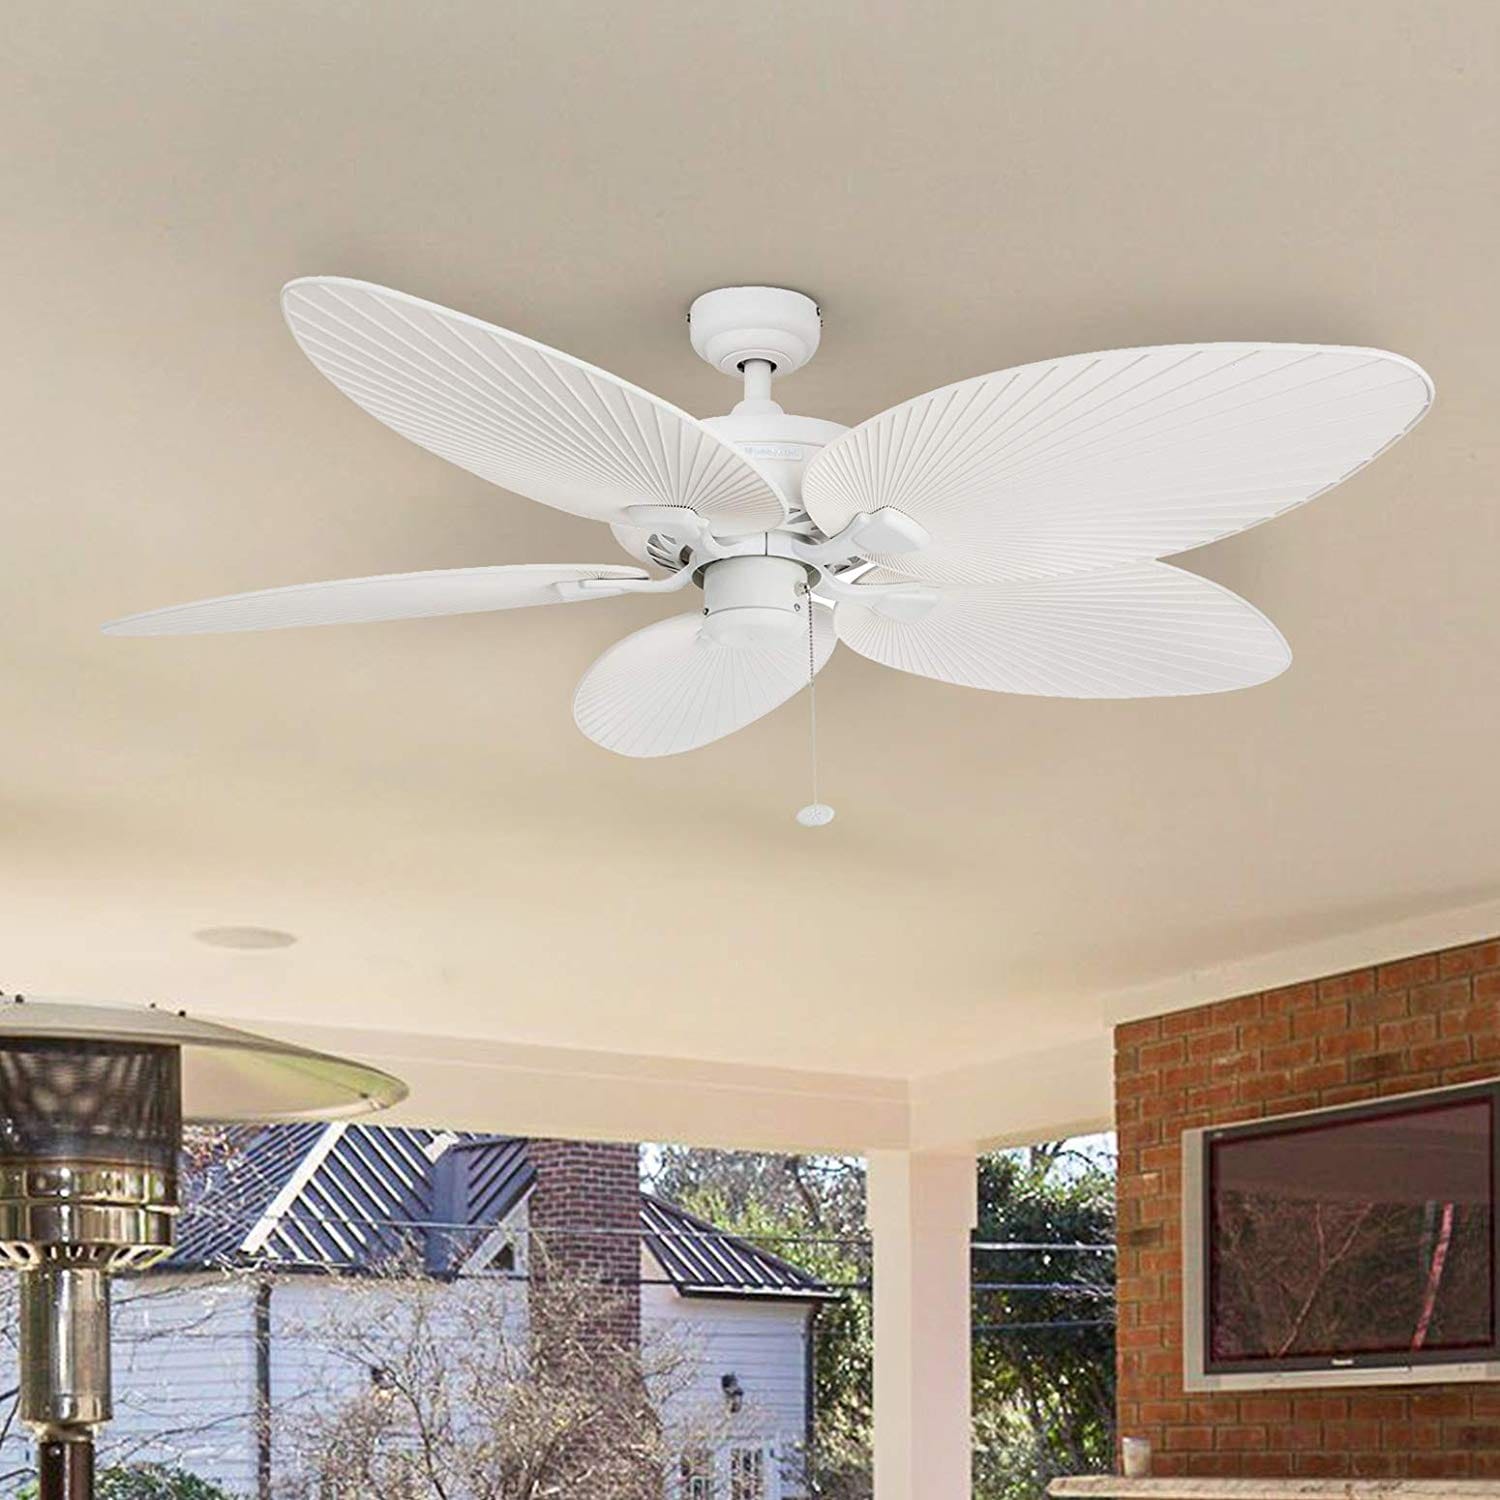 https://ak1.ostkcdn.com/images/products/is/images/direct/cc138084908aba269020ce25e256276bfc53ff3b/Honeywell-Ceiling-Fans-50200-Palm-Island-Tropical-Indoor-Outdoor-Ceiling-Fan%2C-White---52-inch.jpg